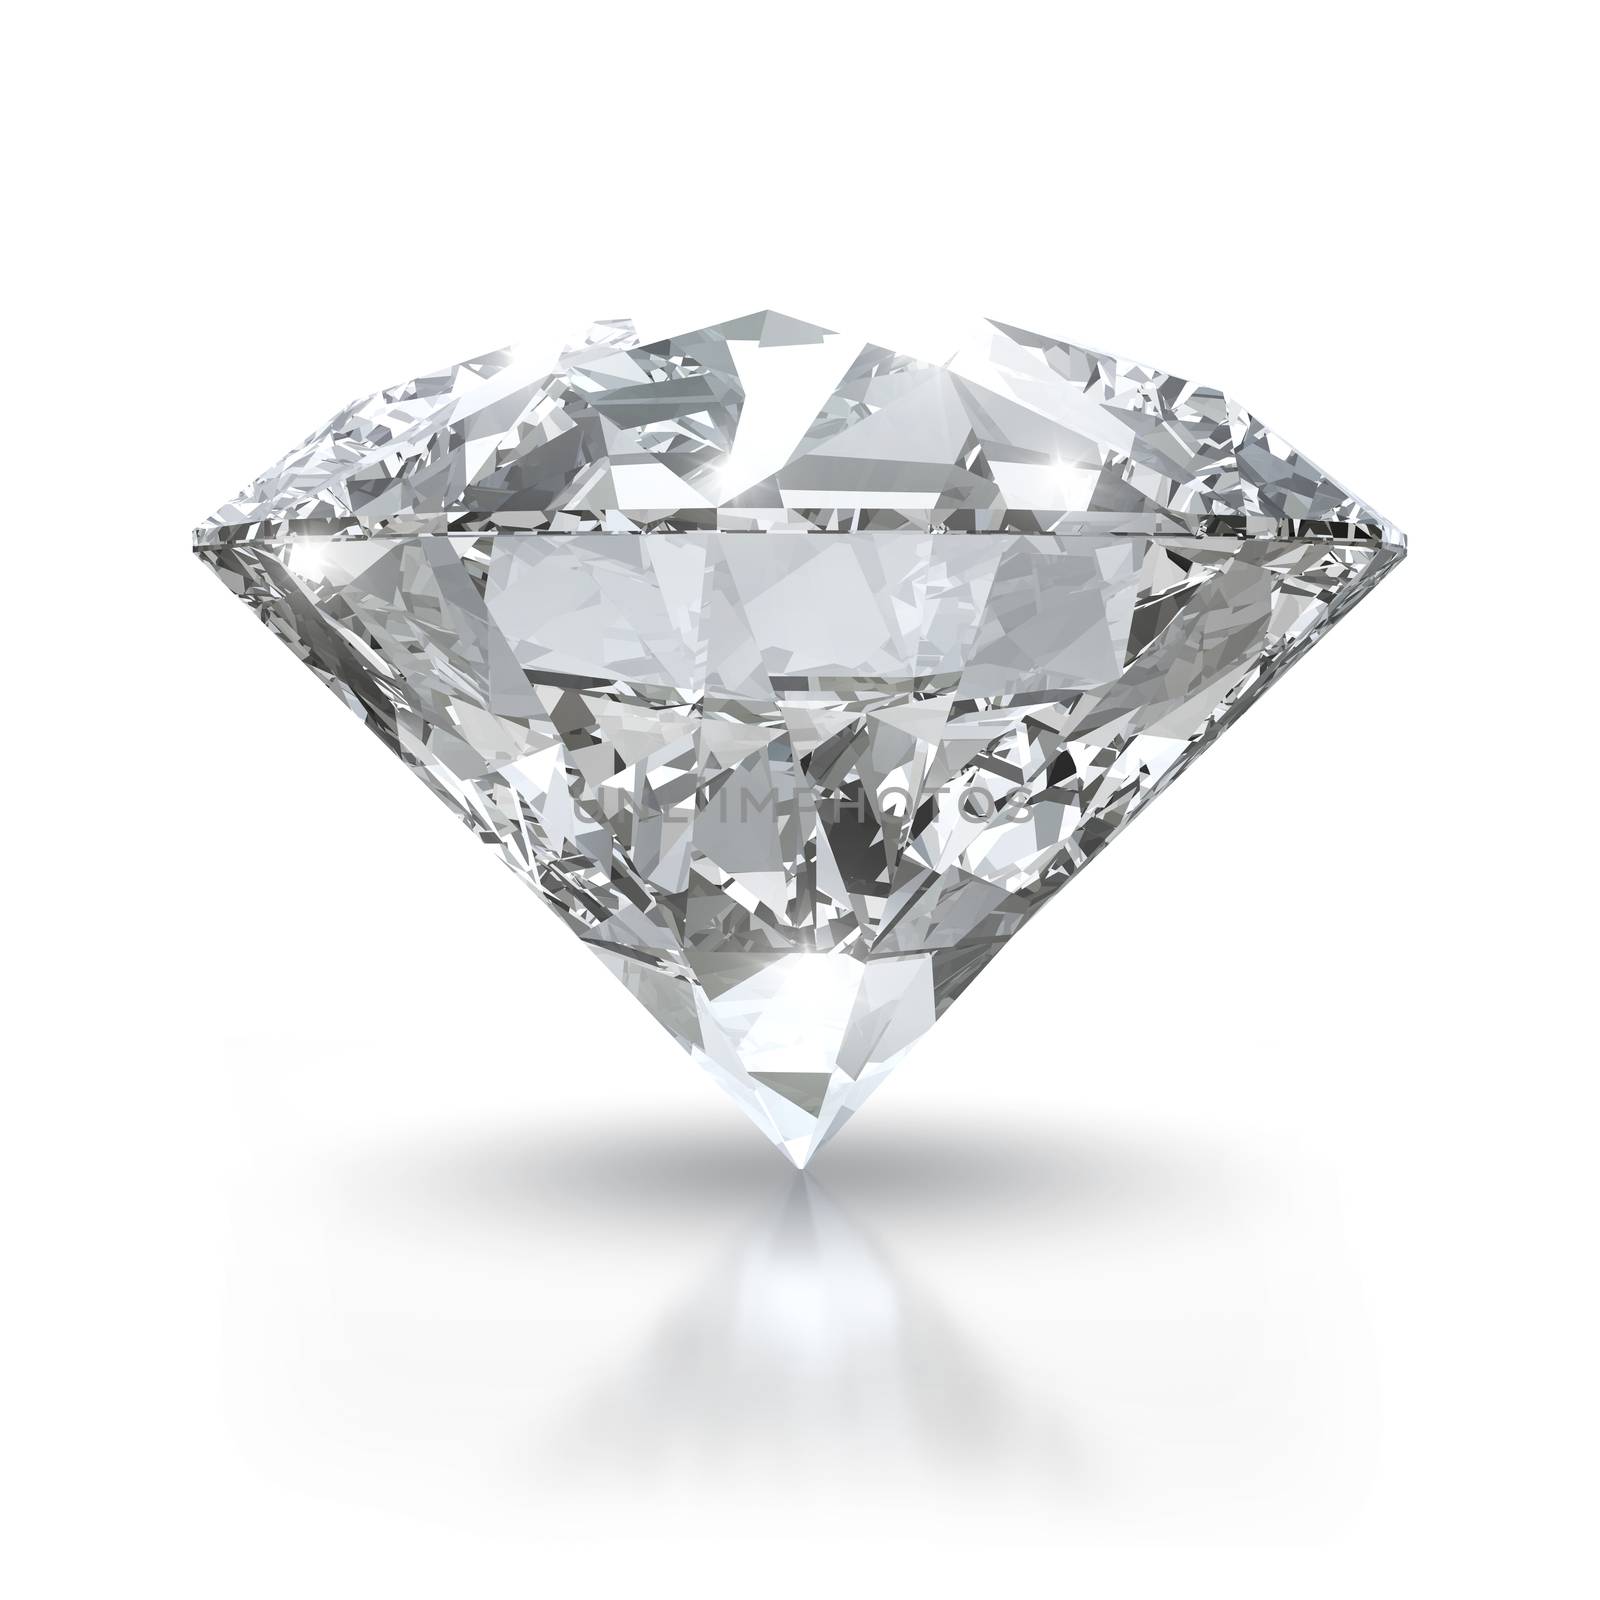 Luxury diamond with clipping path
 by 123dartist